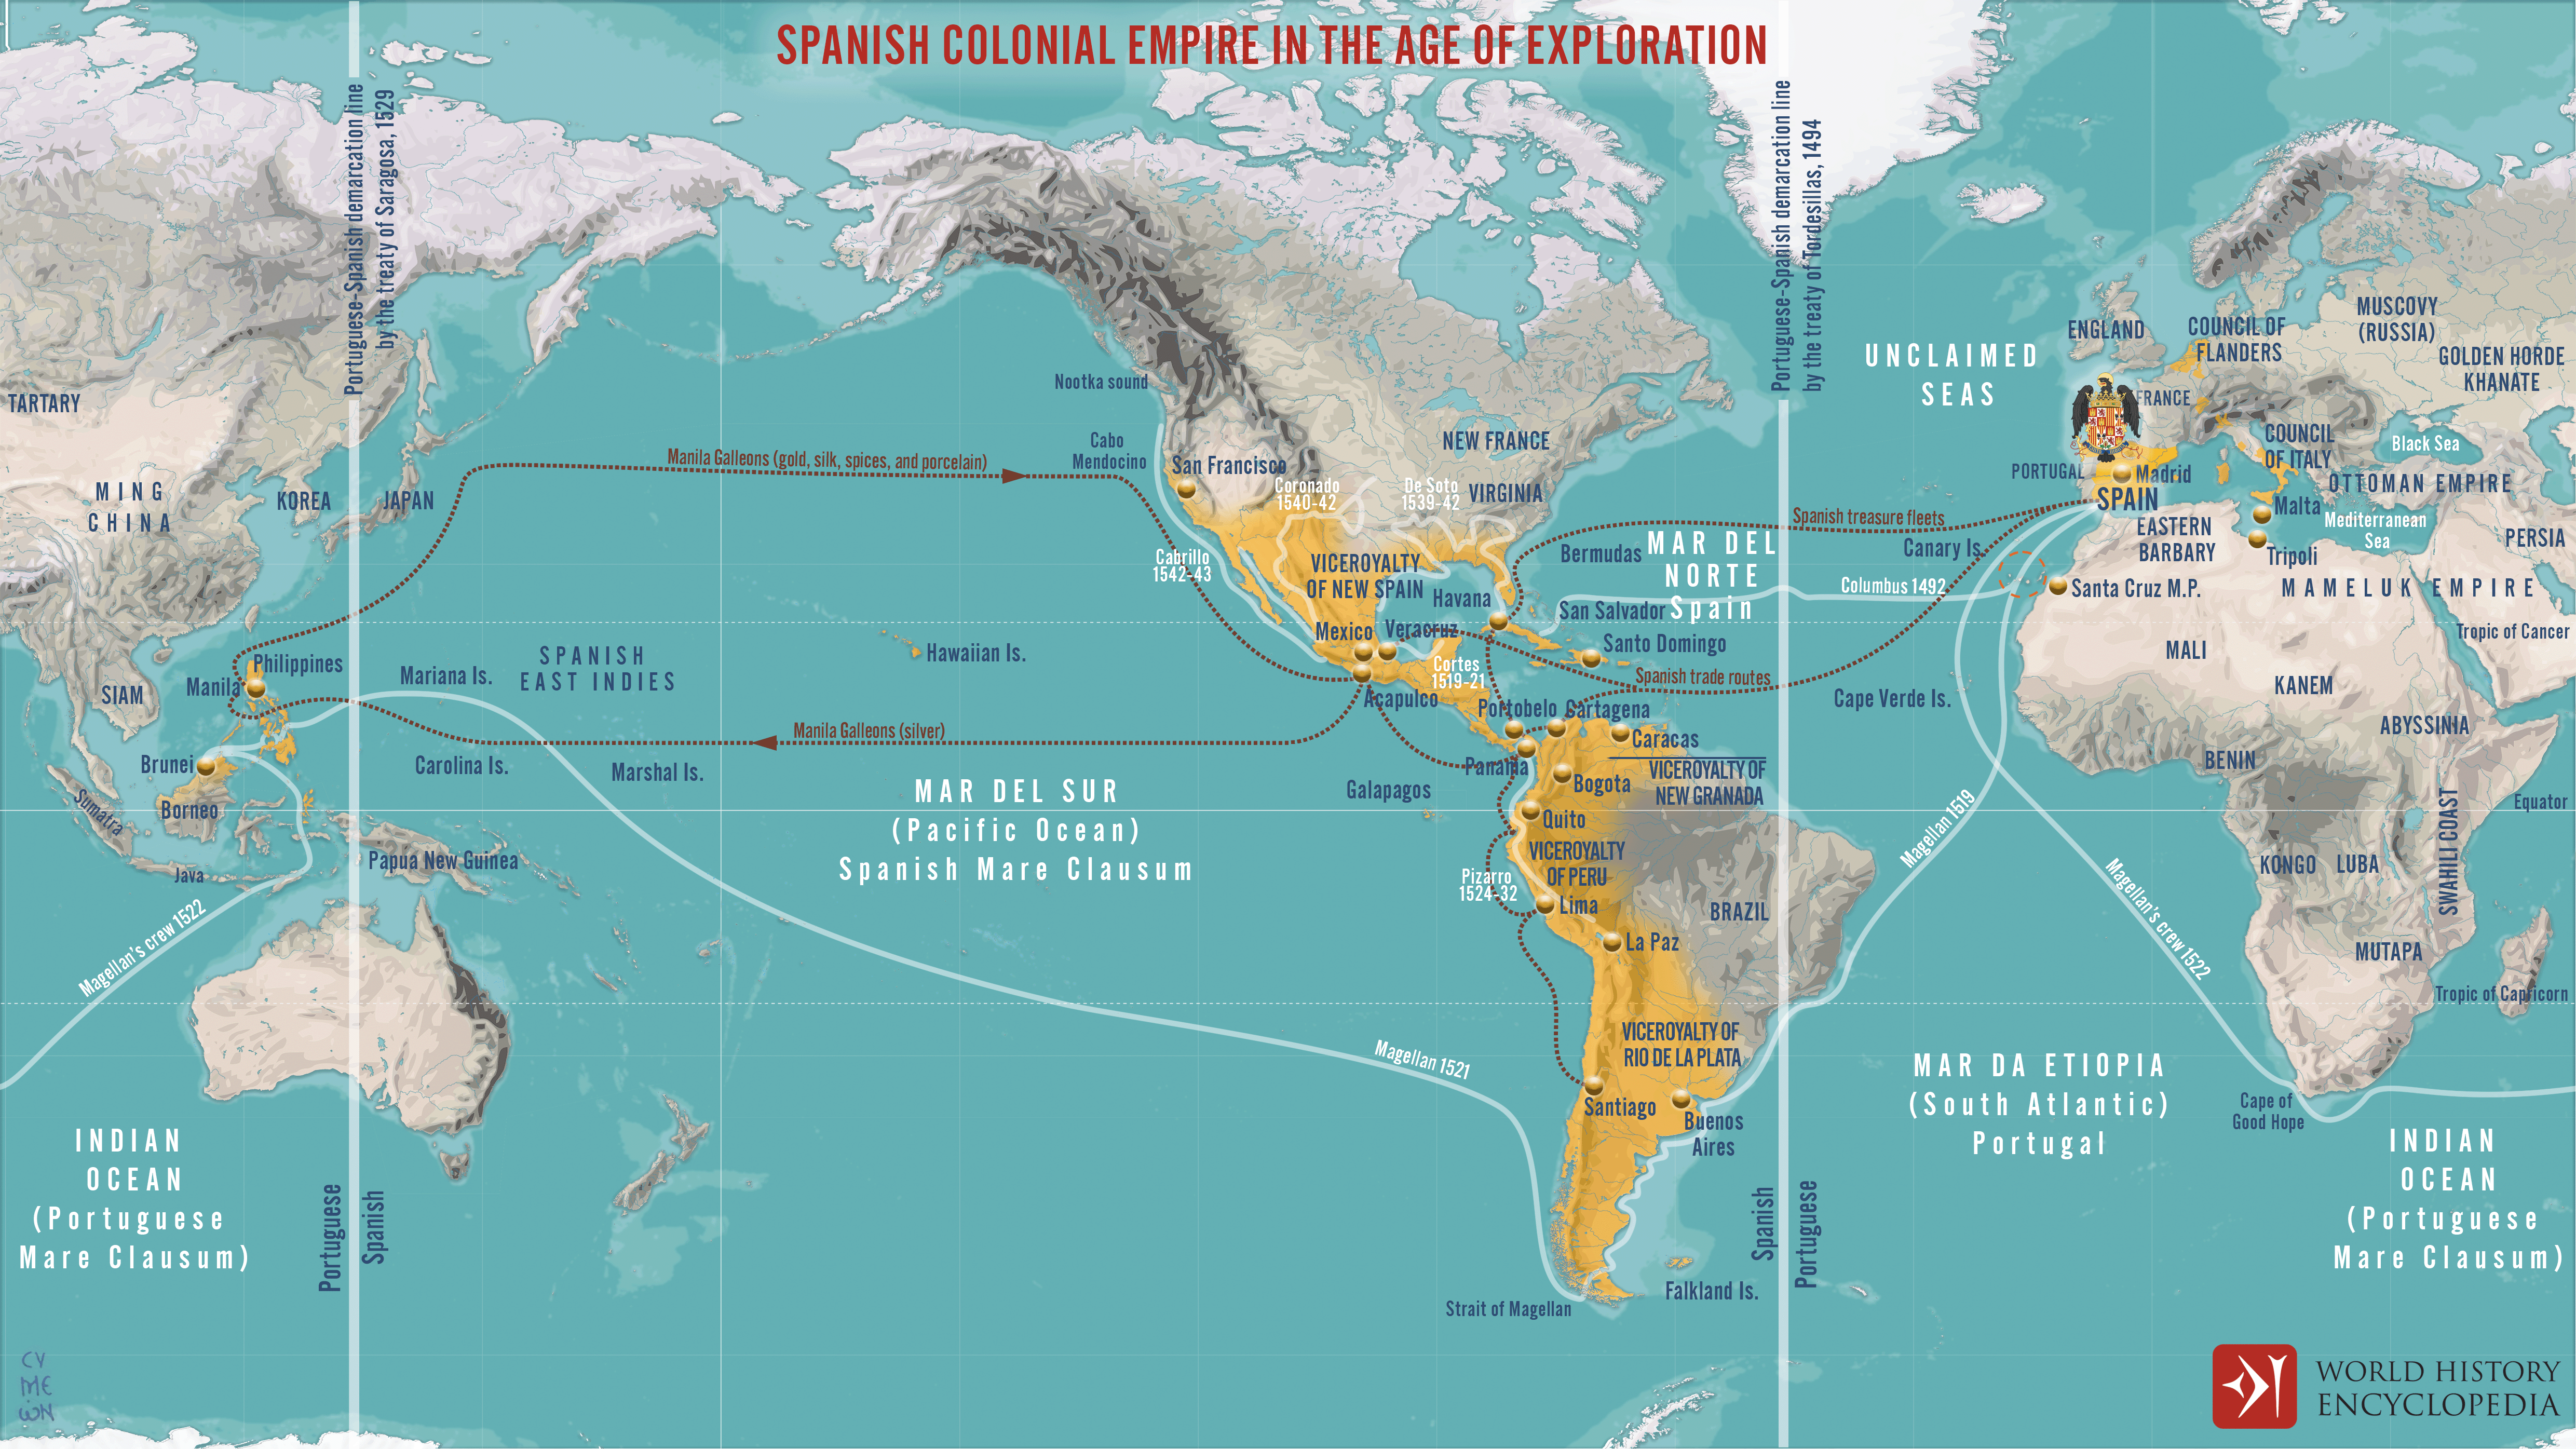 The Spanish empire extends across the Americas to the Philippines and Brunei